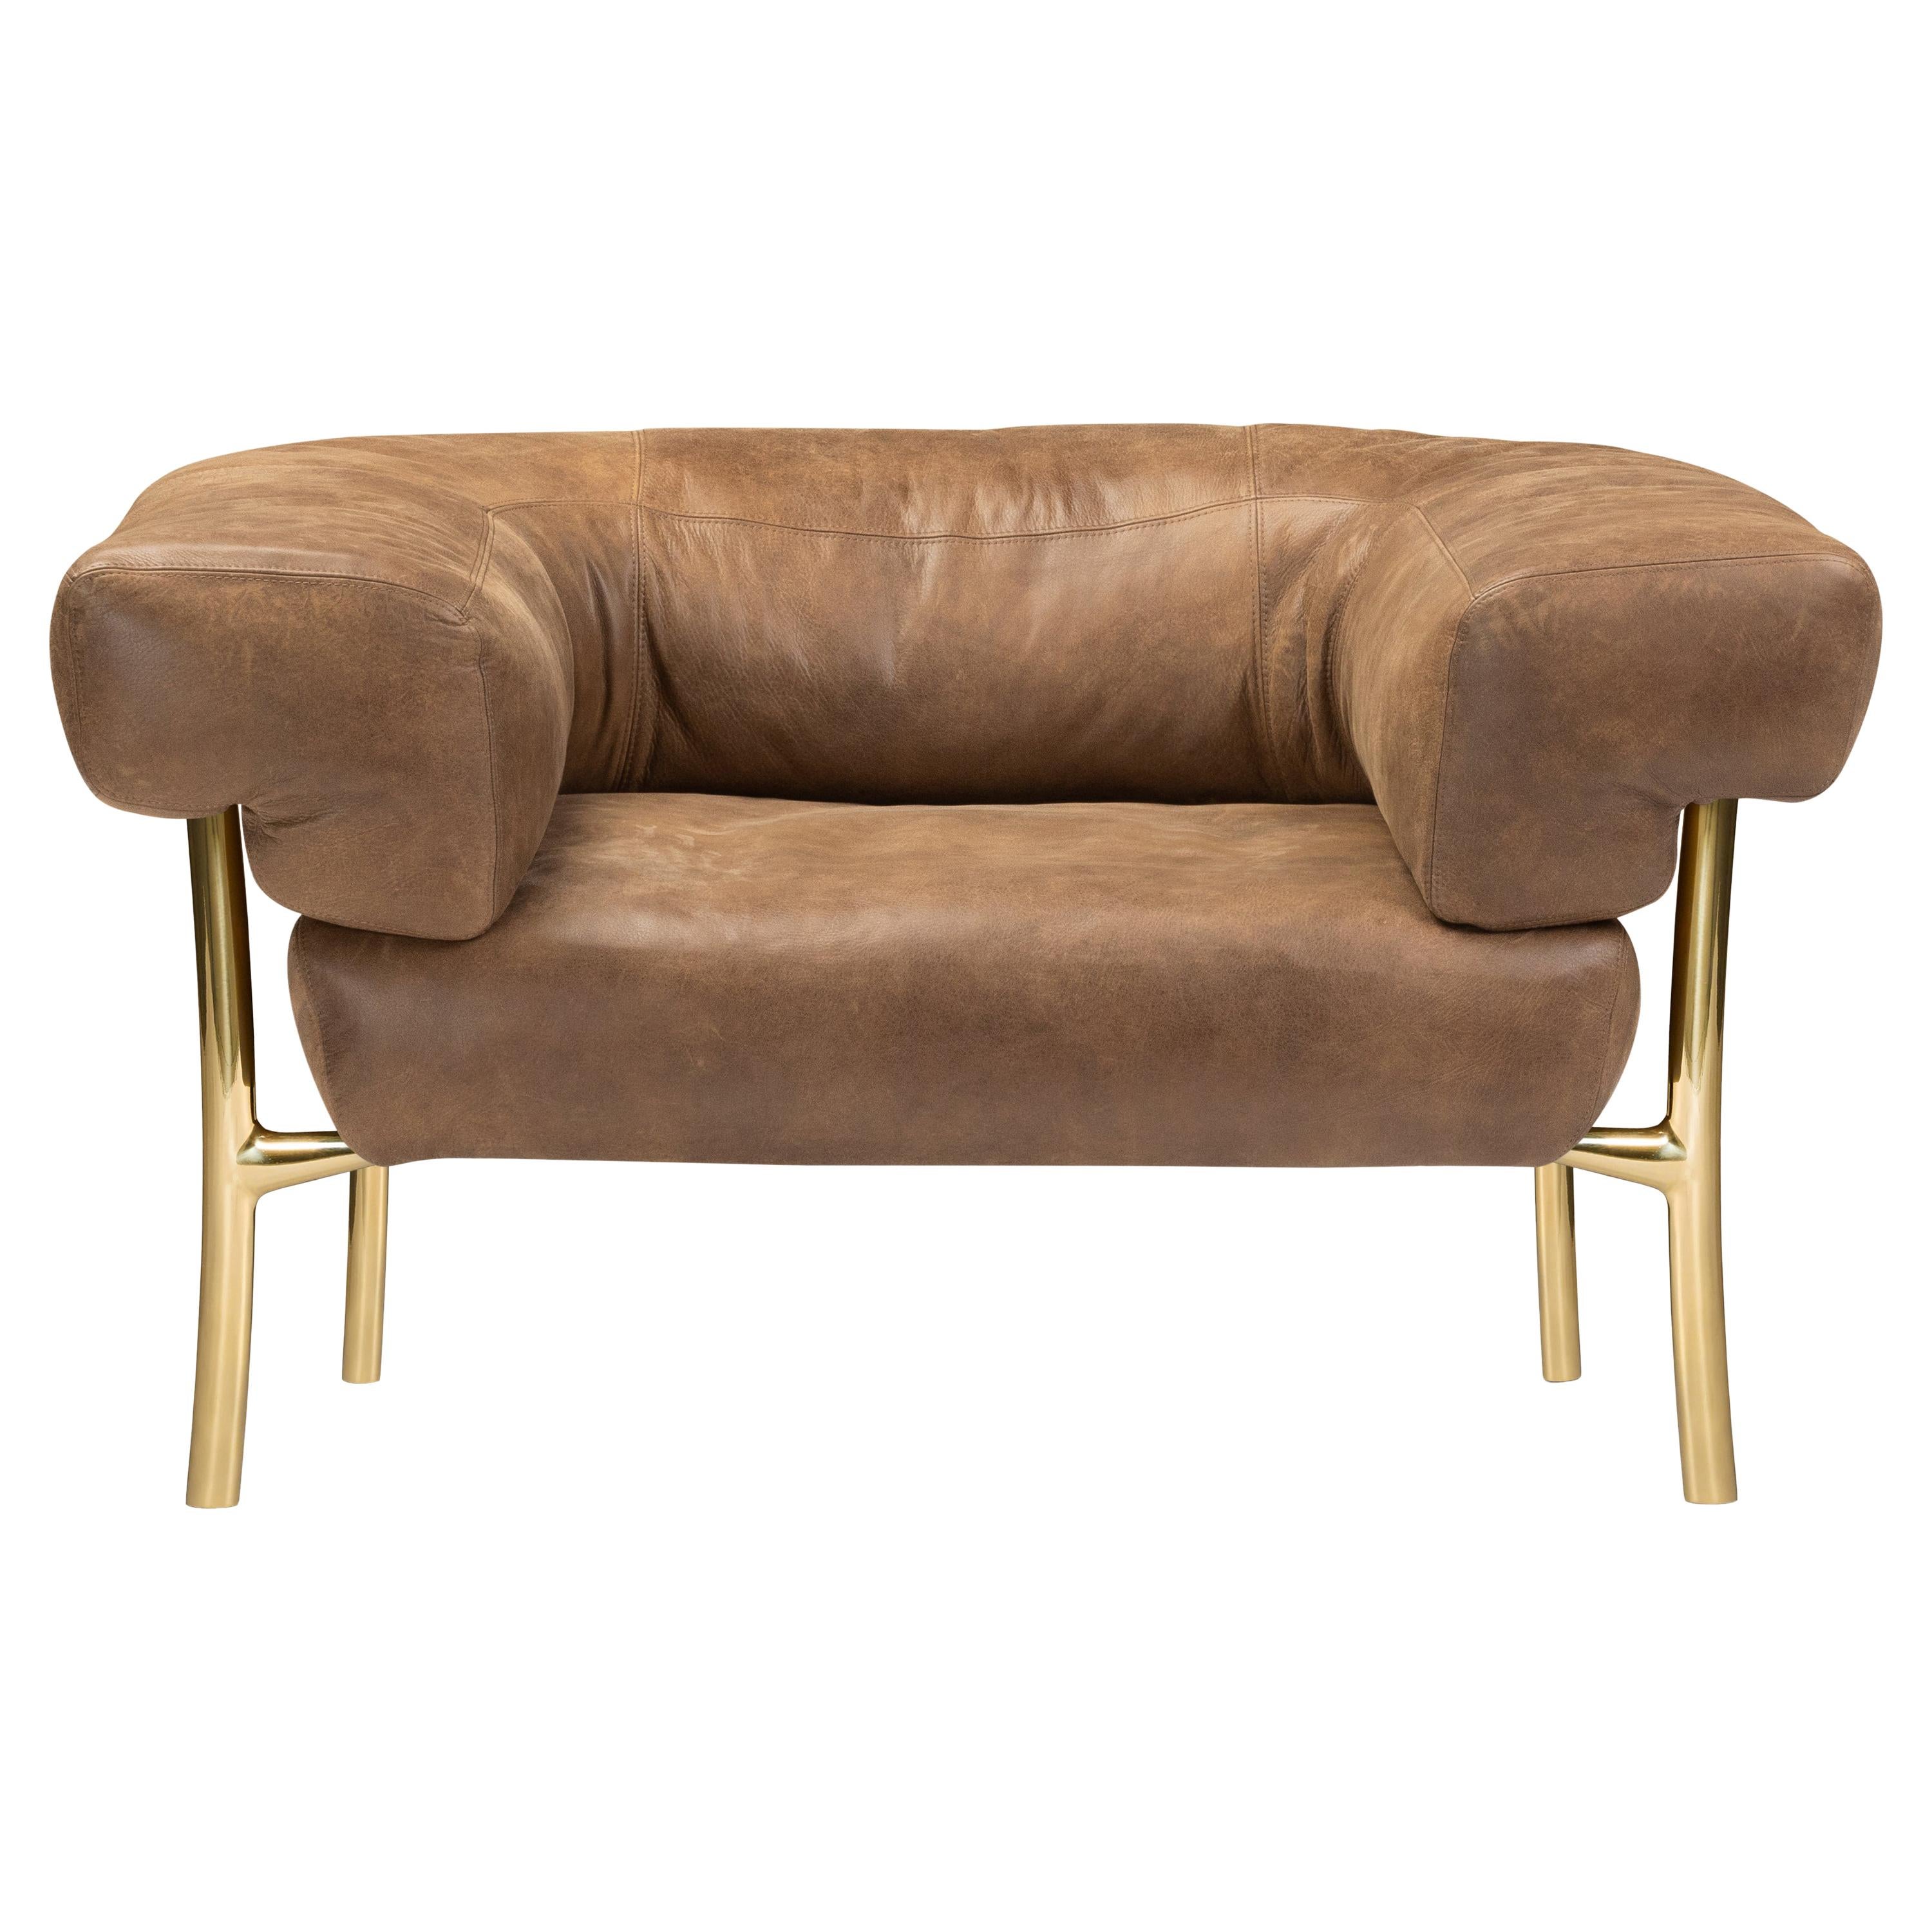 Ghidini 1961 Katana Lounge Chair in Leather & Polished Brass by Paolo Rizzatto